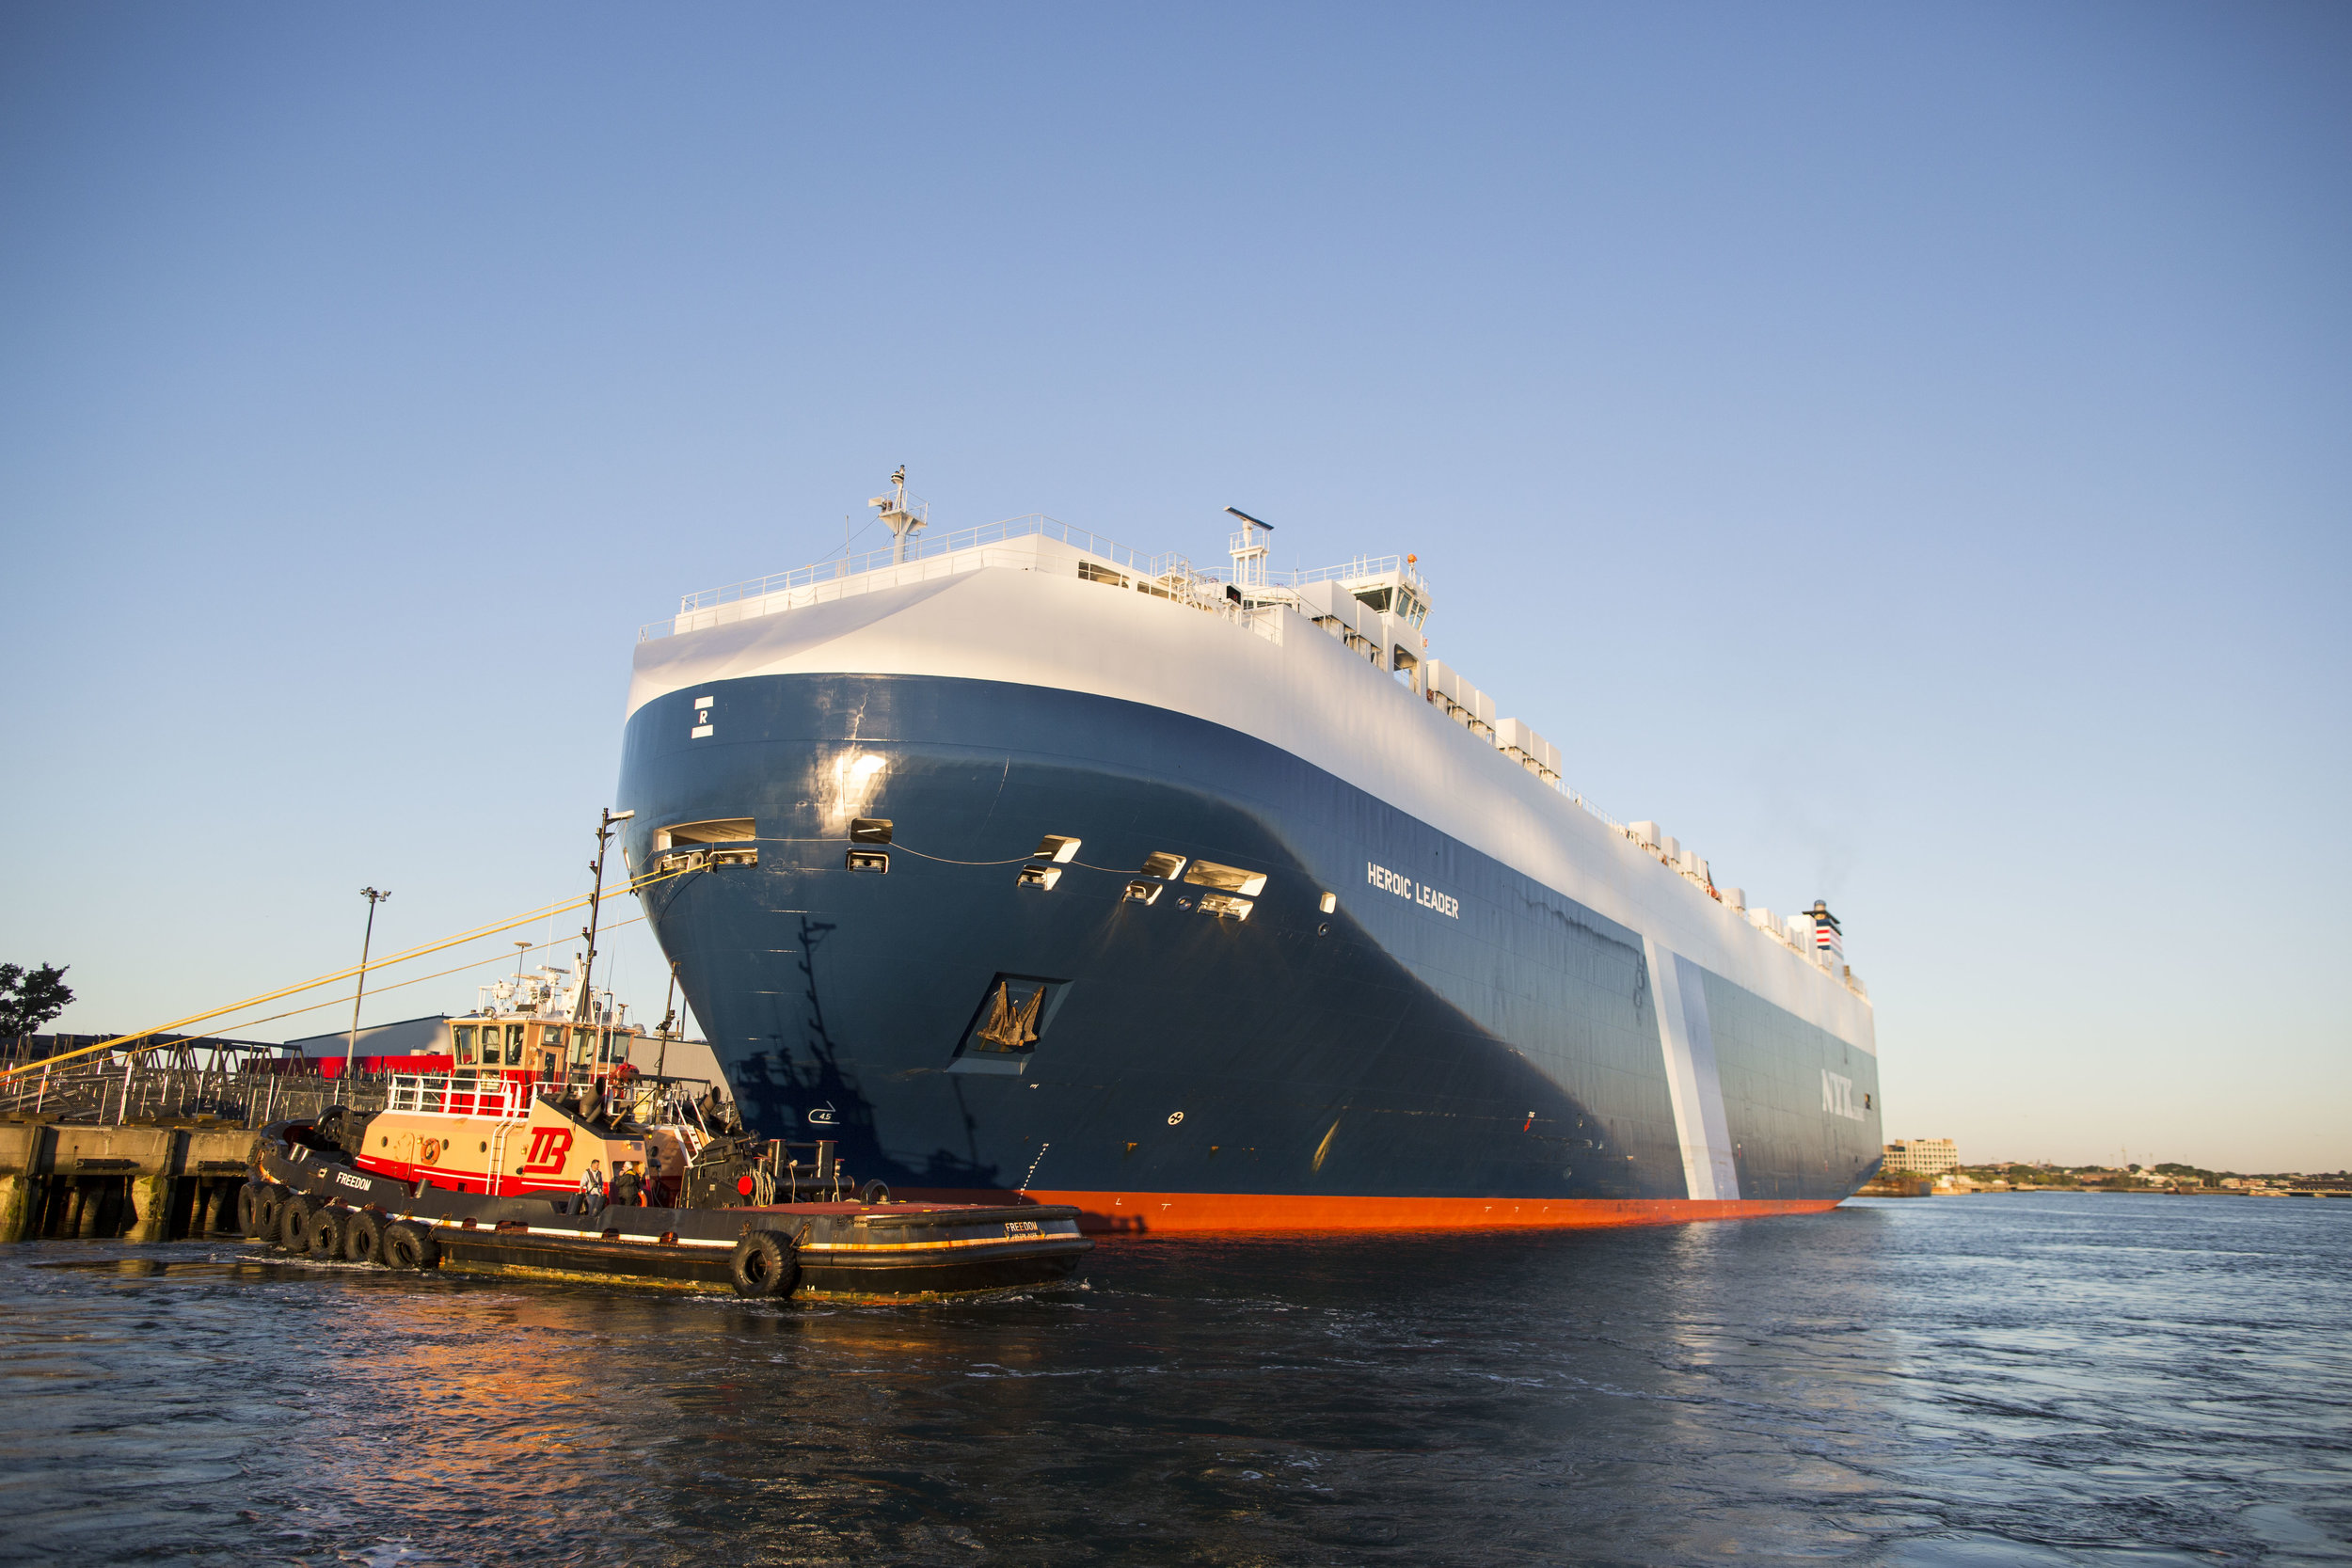  The car carrying ship Heroic Leader successfully and safely docked in port with the help of Boston Harbor Pilot Frank Morton on Aug. 23. The ship will deliver around 1500 brand new Subarus. 